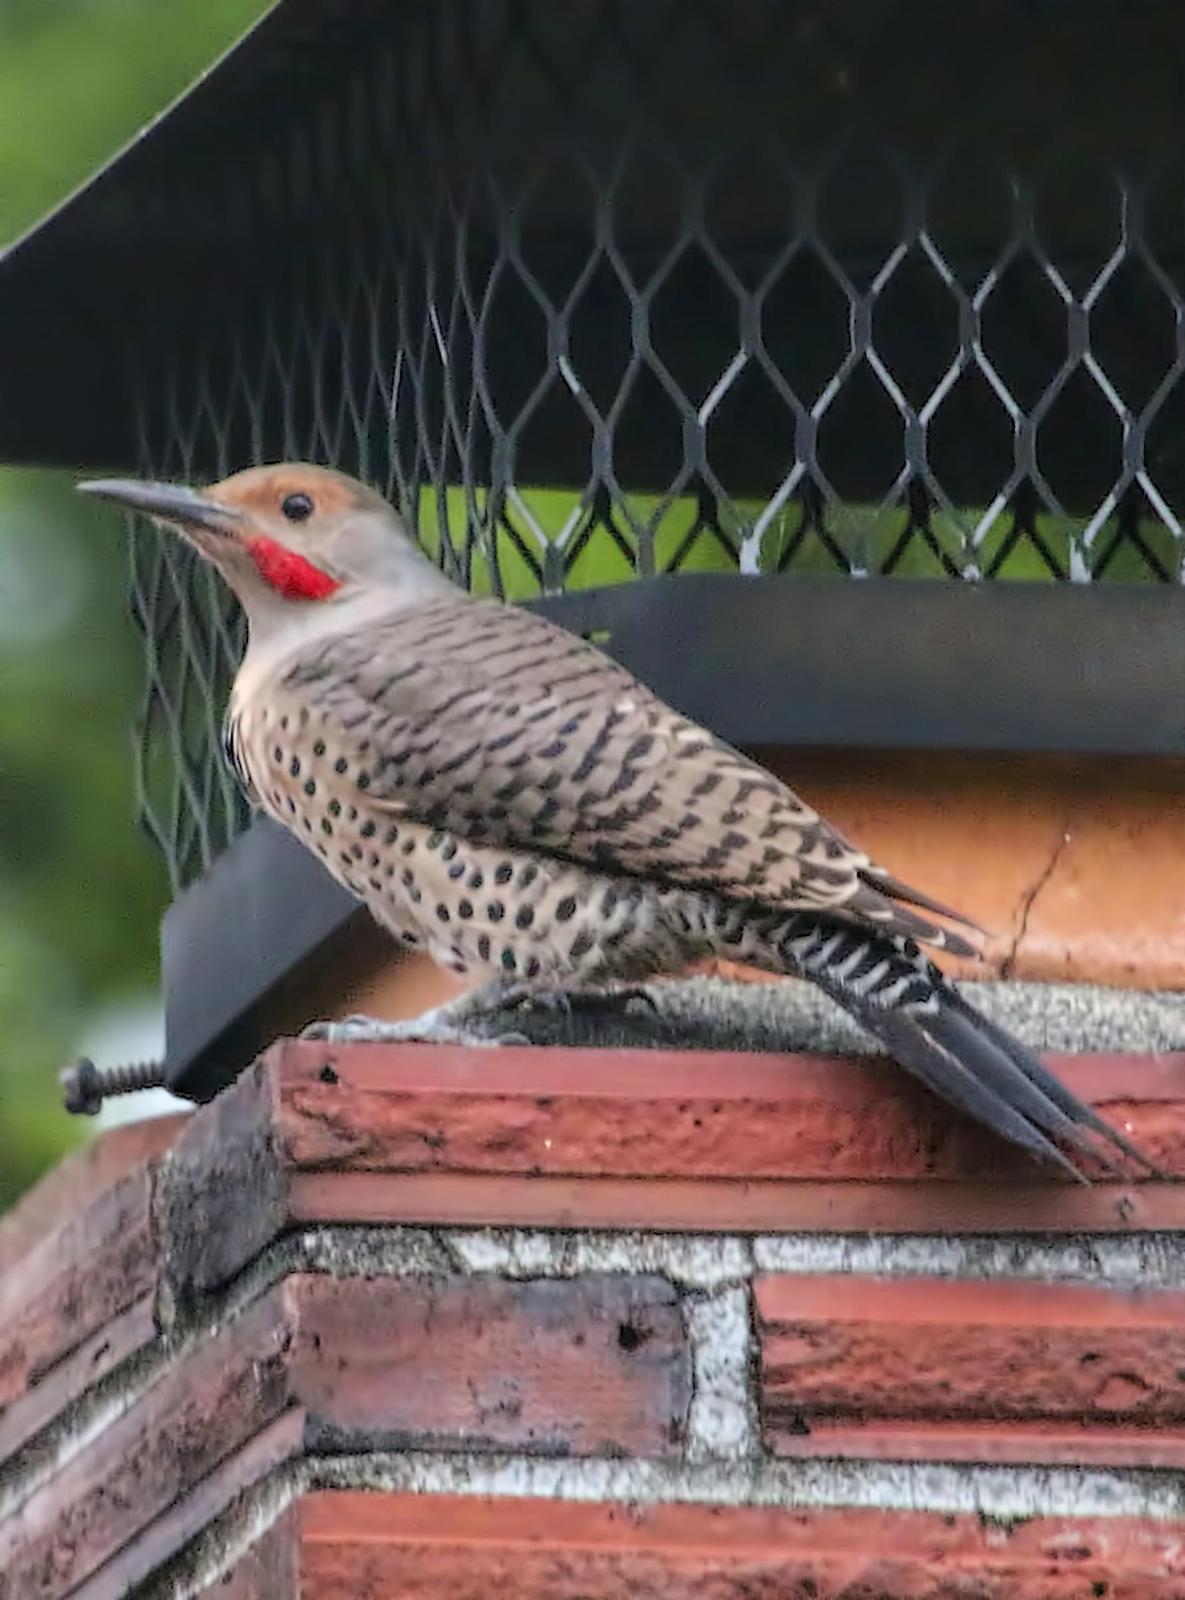 Northern Flicker (Red-shafted) Photo by Dan Tallman